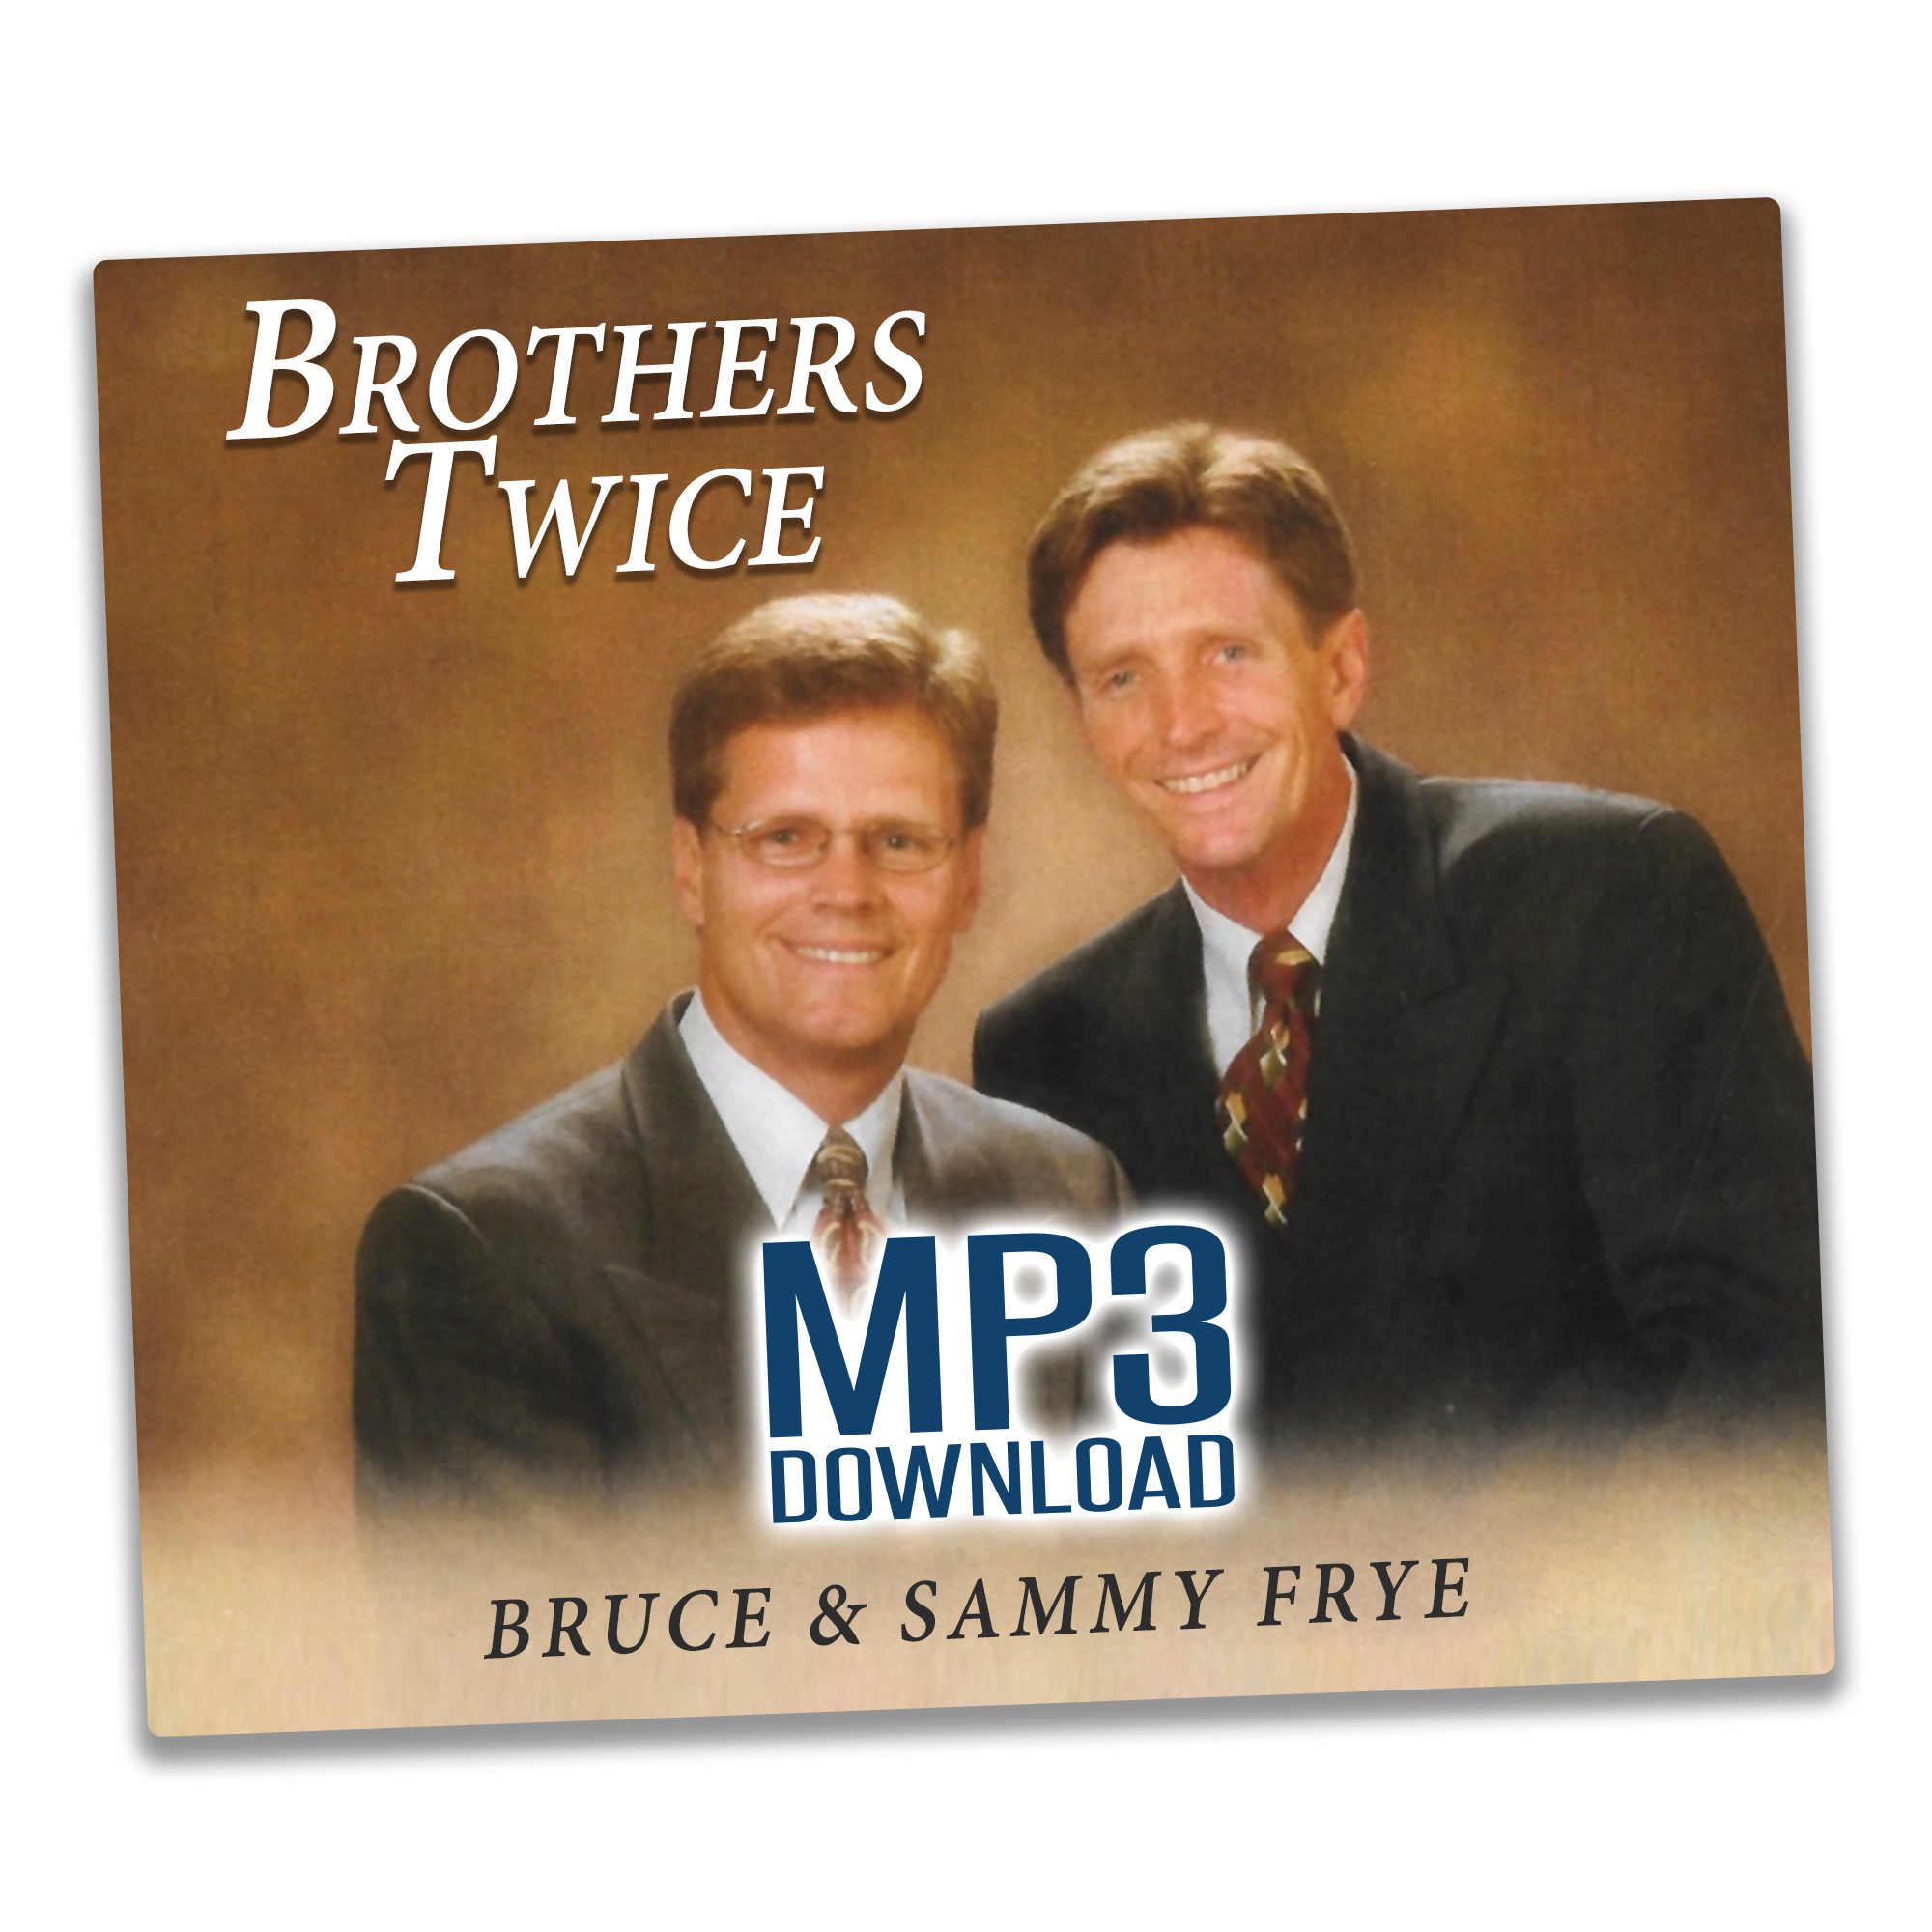 Brothers Twice - Track 1